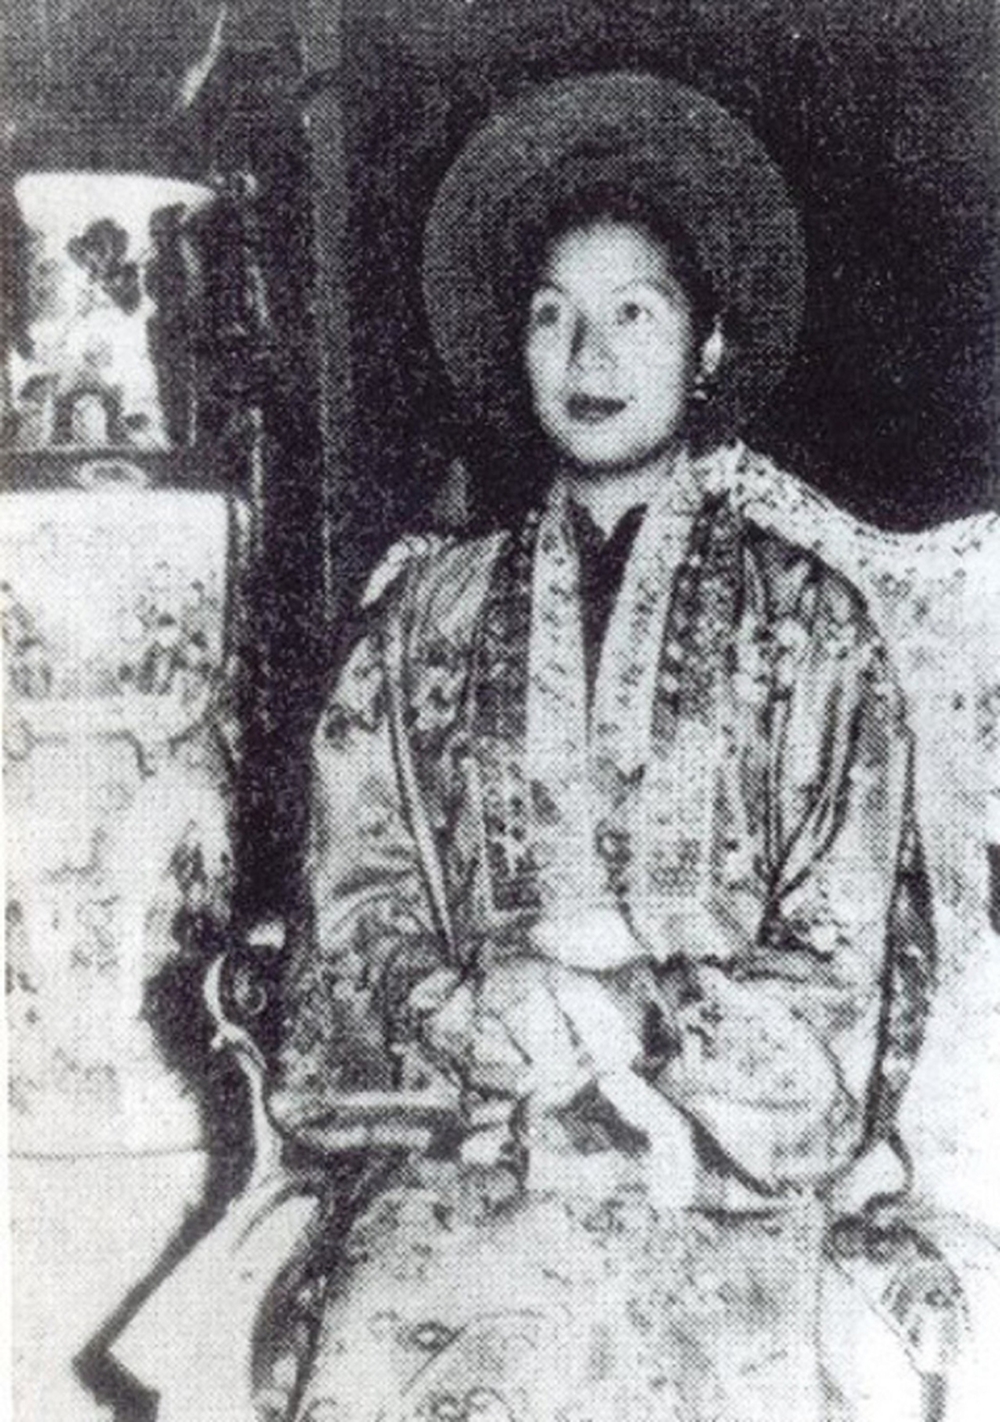 Famous beautiful lady from Kinh Bac, 2 times as an unofficial wife, lonely at the end of her life - Photo 2.